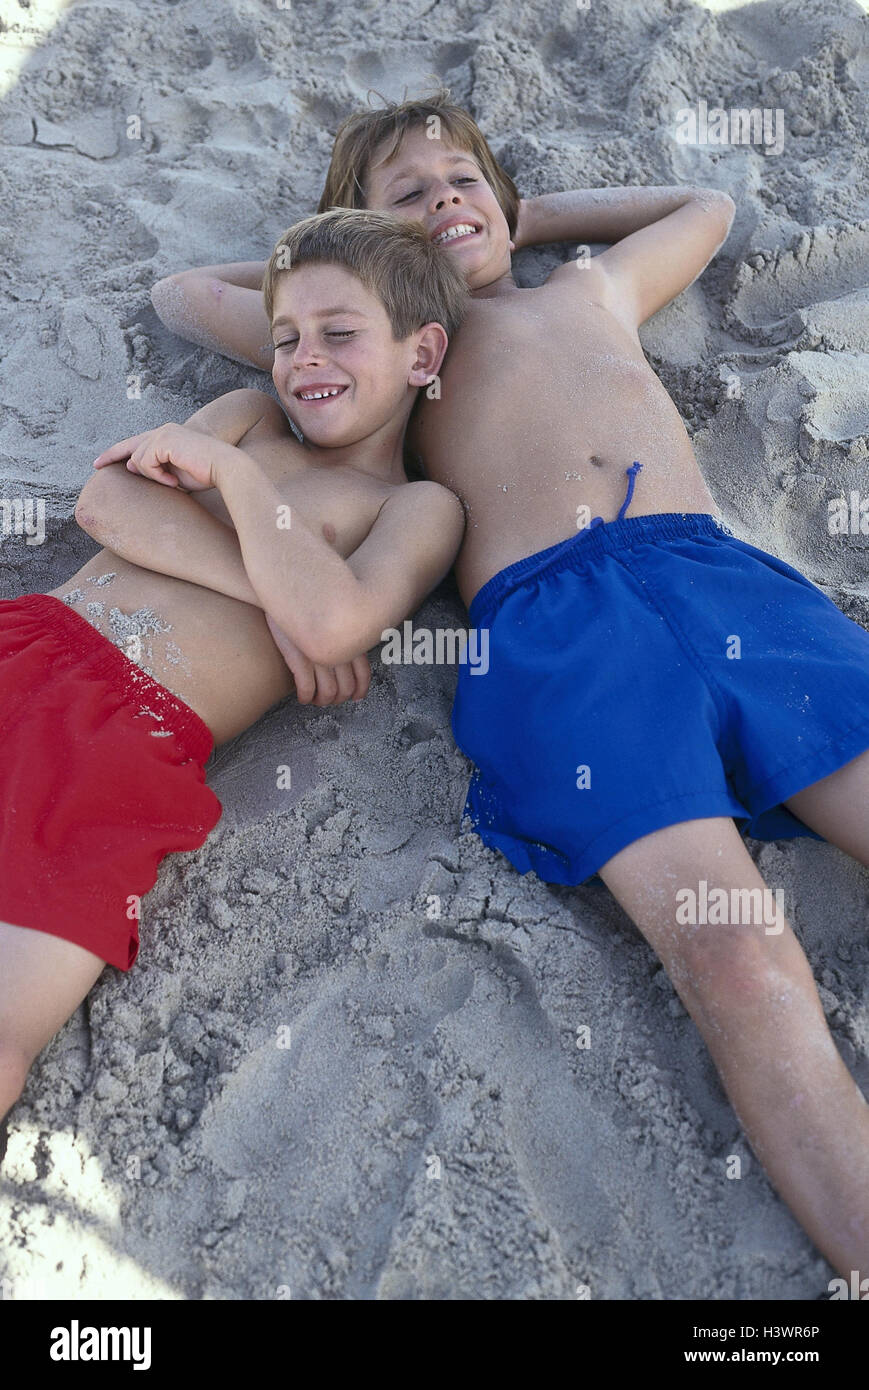 Sandy beach, boy, shade, lie, rest, very close, outside, beach, Sand, vacation, holidays, leisure time, childhood, friends, siblings, brothers, children, 7 + 10 years, happy, rest, take it easy, relaxing, recreation, swimming trunks, swimwear Stock Photo